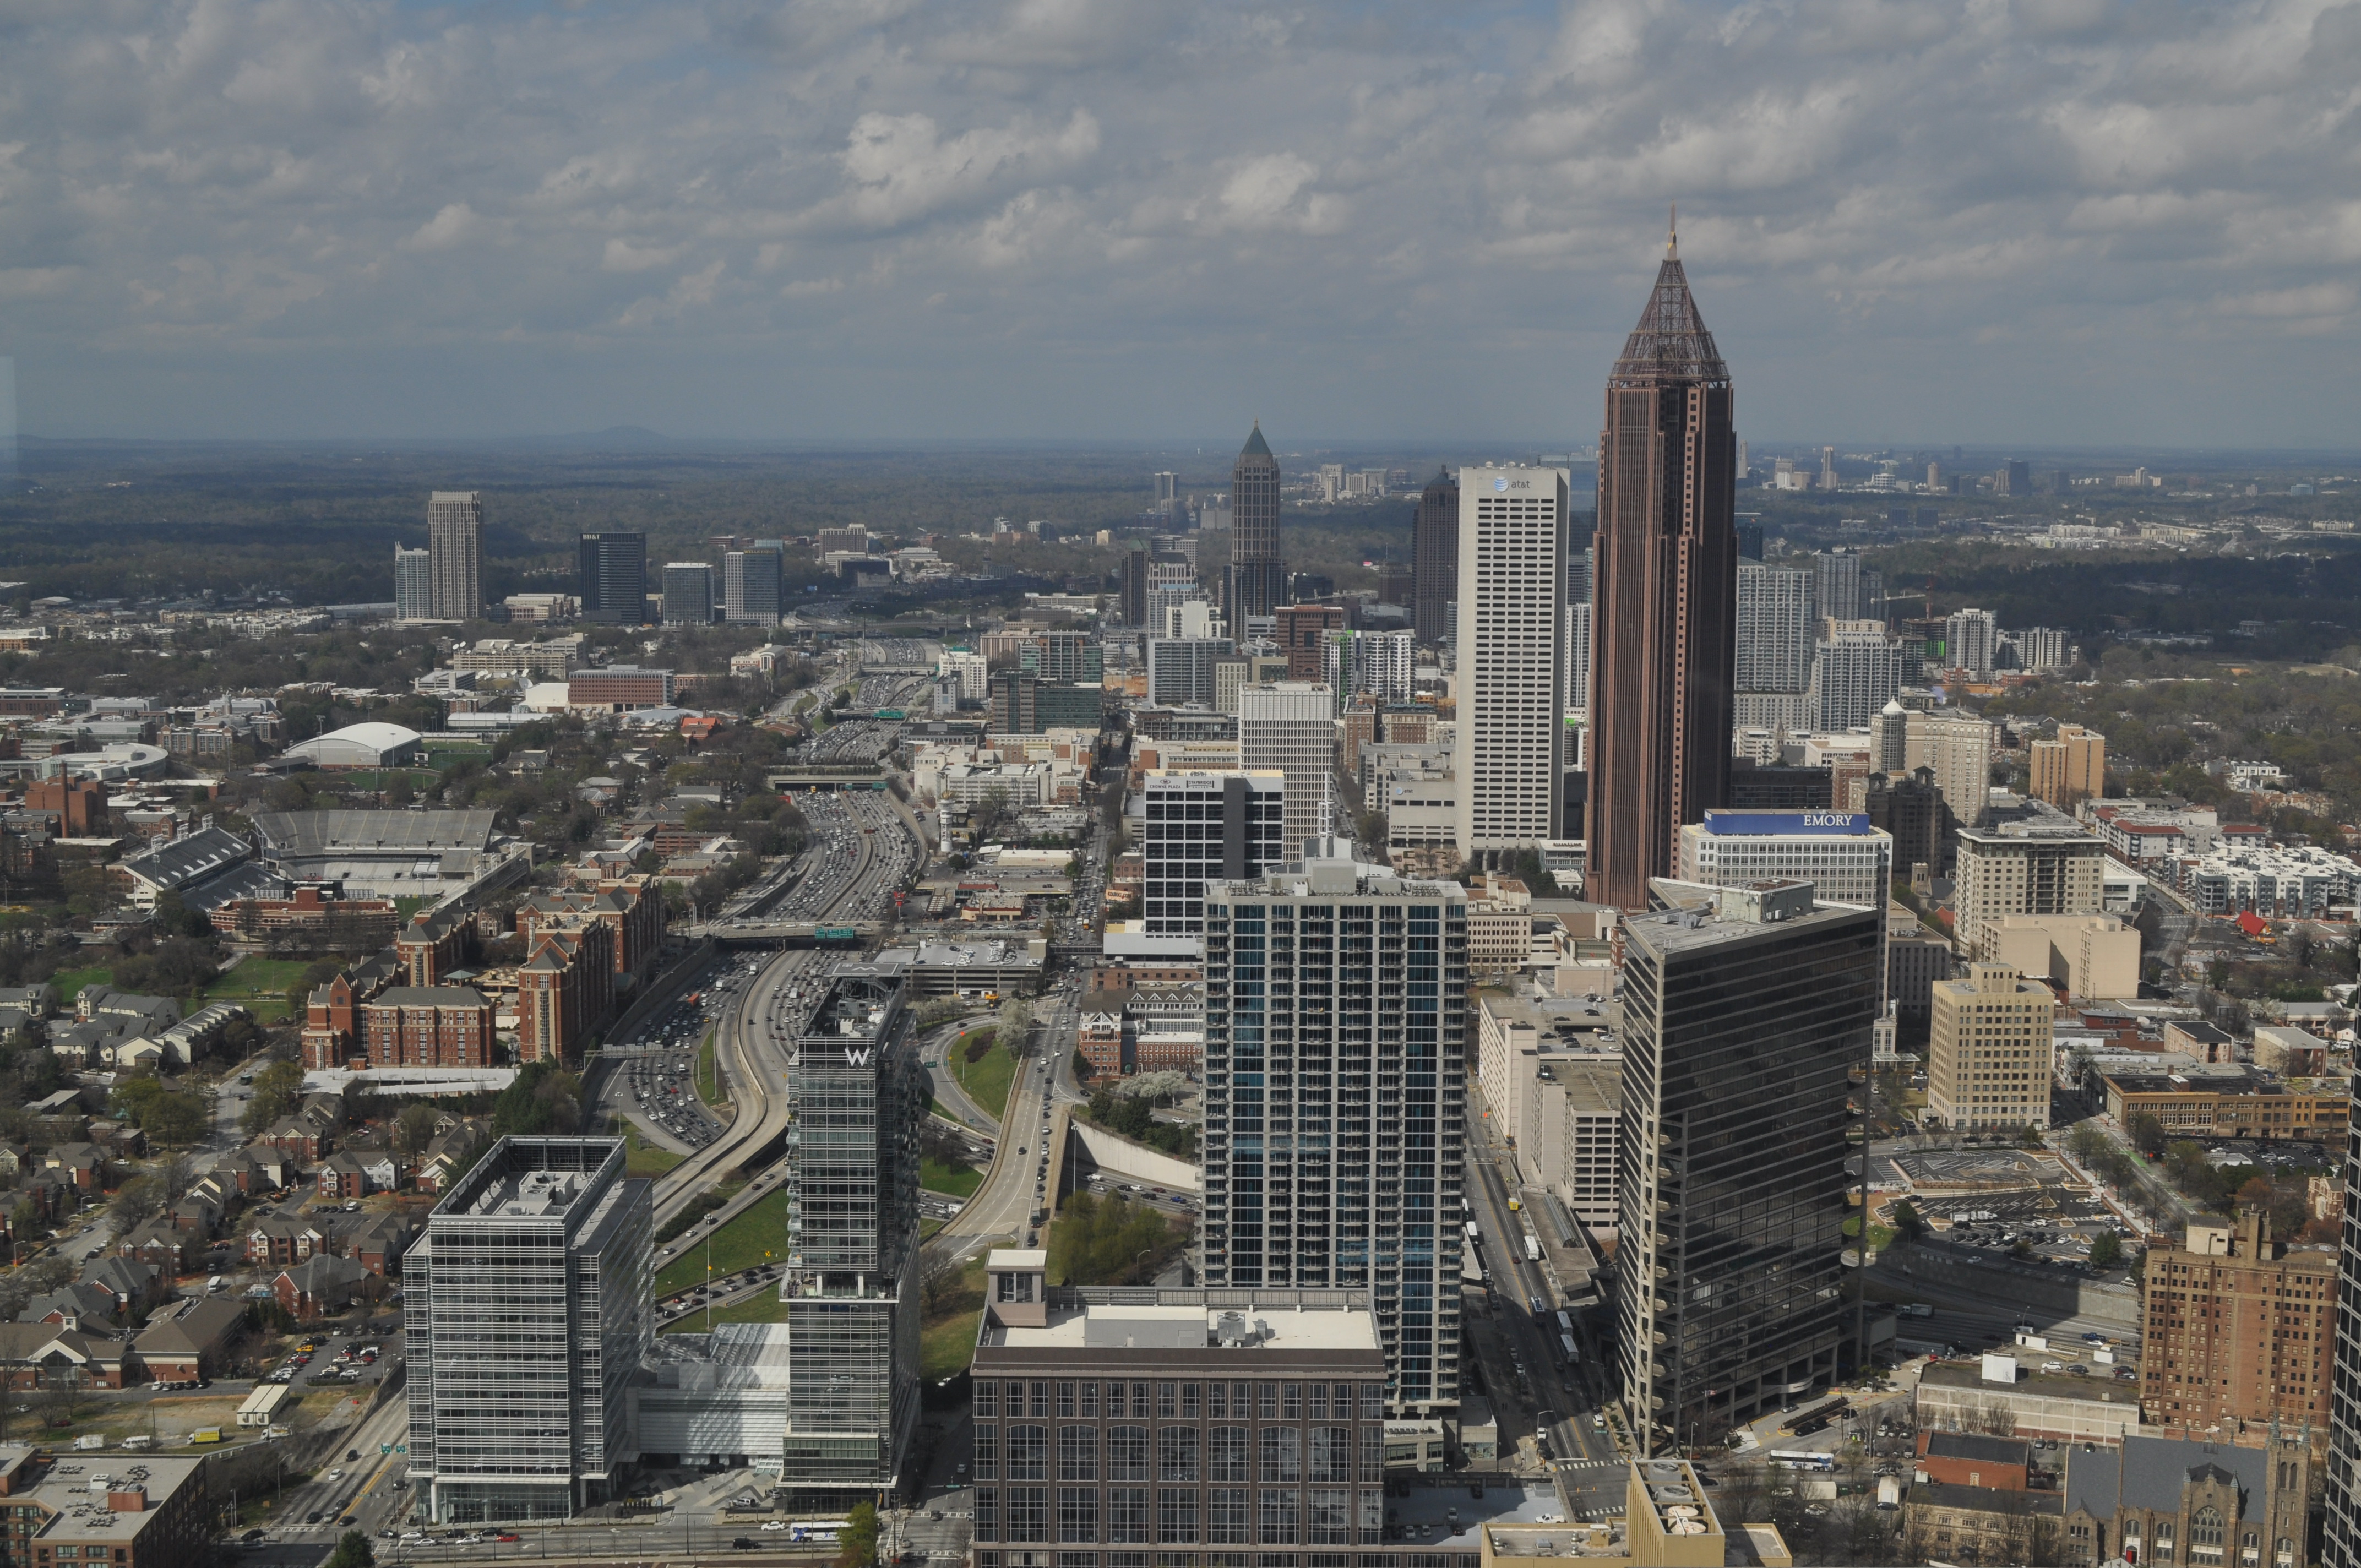 An aerial view of the city of Atlanta. There are various buildings and skyscrapers. 